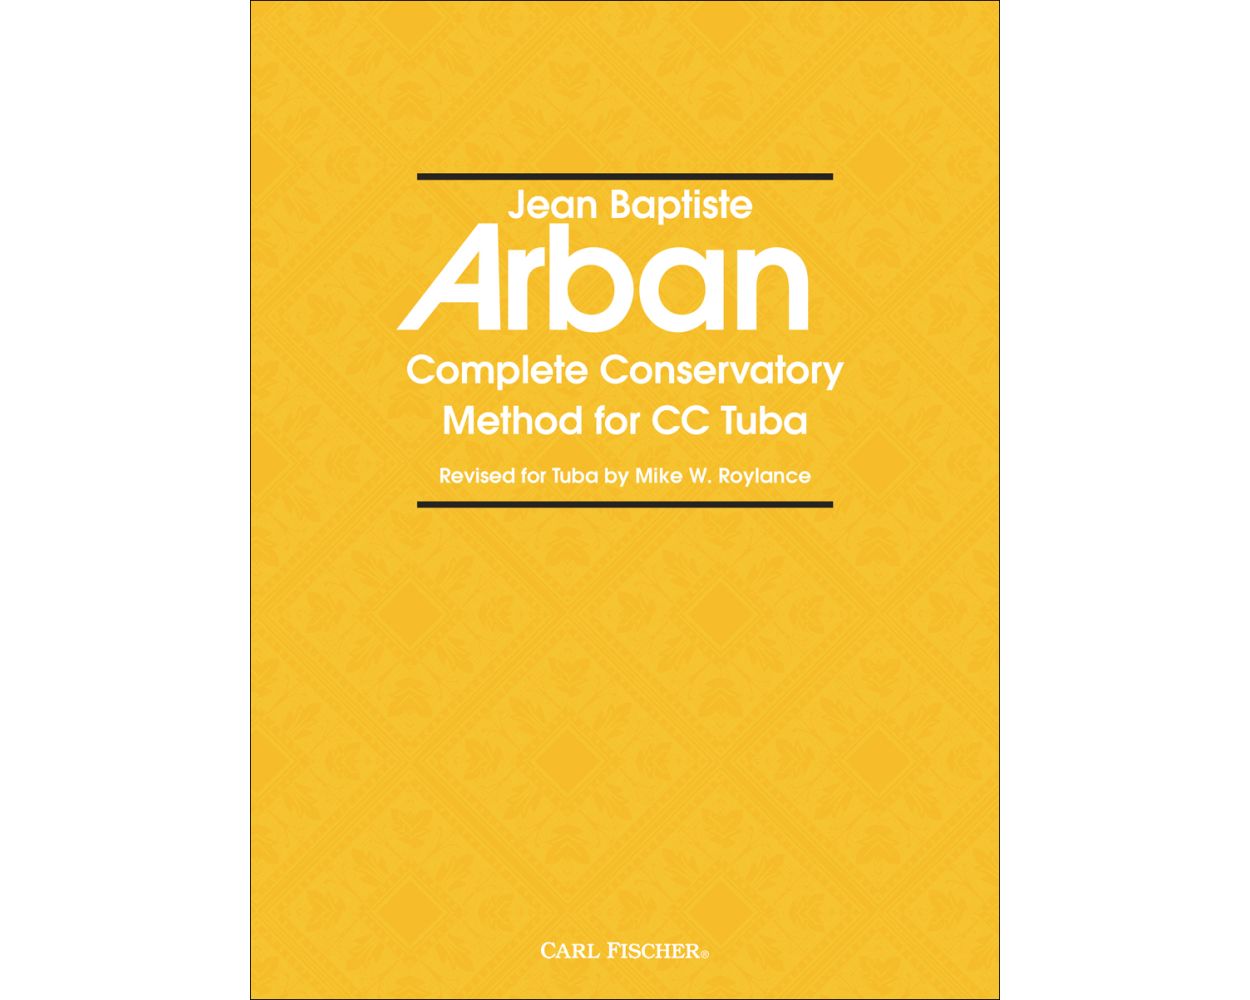 Arban Complete Conservatory Method for Tuba Ed. Mike W Roylance - Carl Fischer